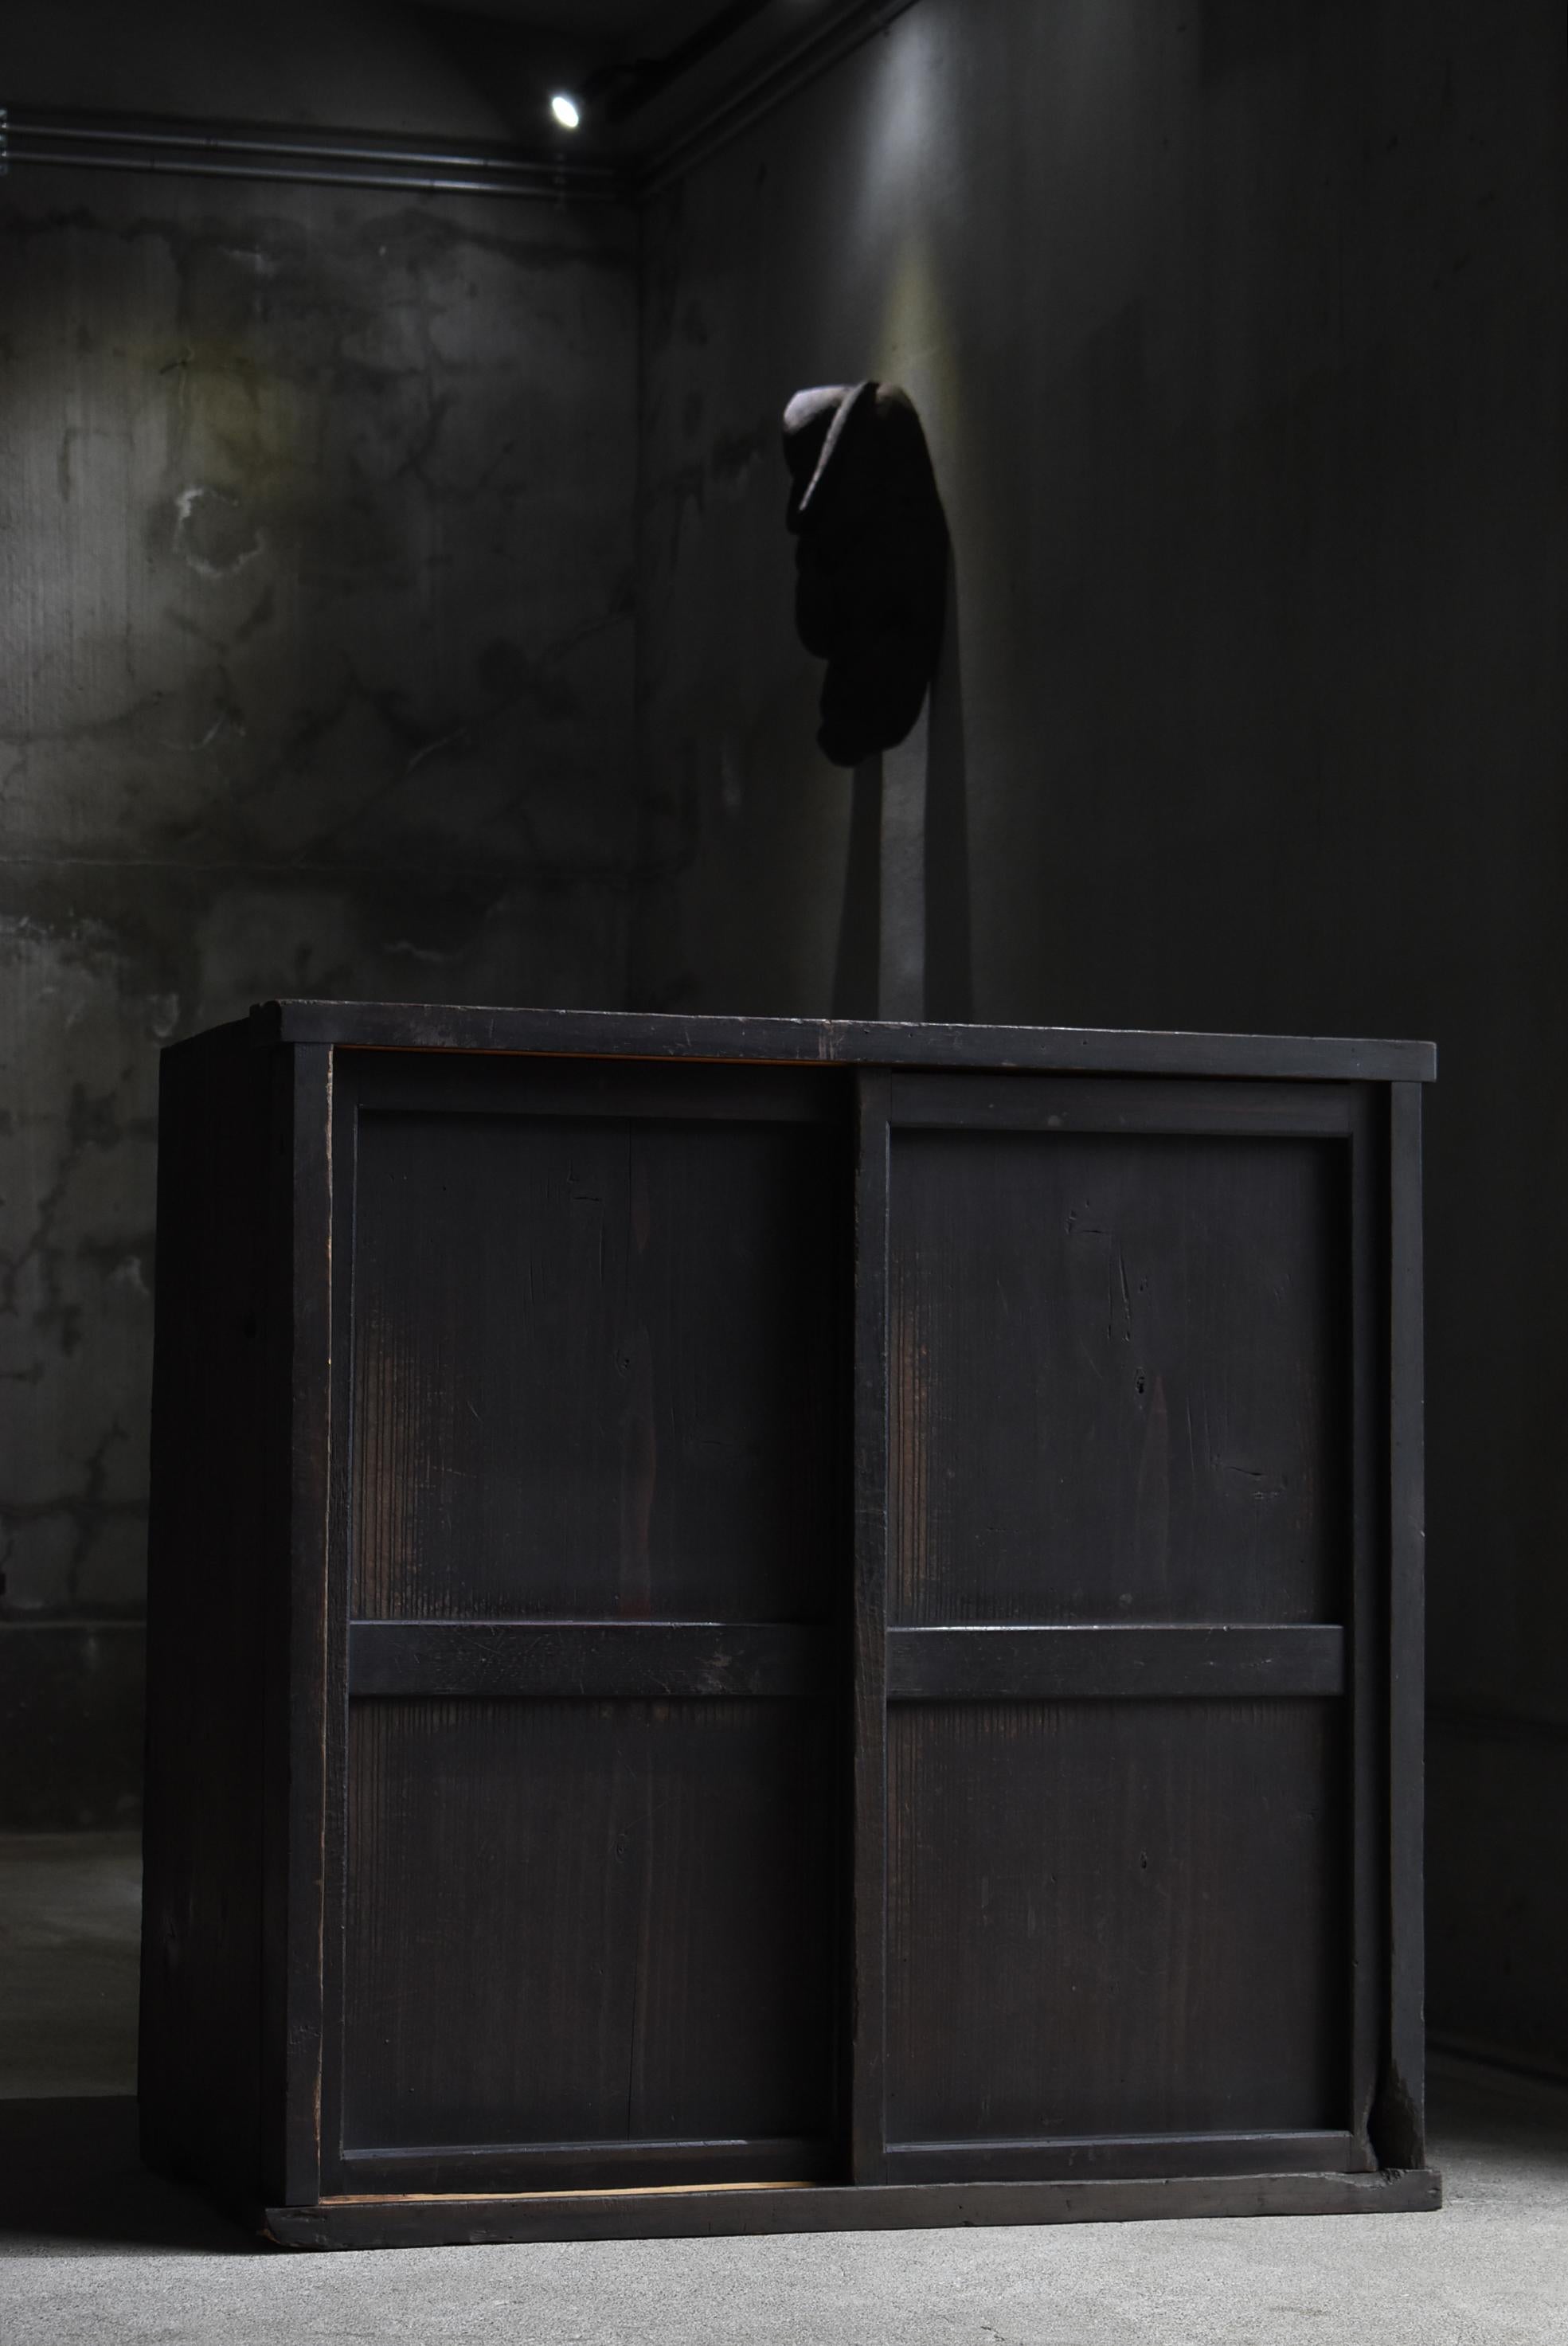 Very old Japanese black Tansu.
This furniture is from the Meiji period (1860s-1900s).
It is made of cedar wood.

It is simple, beautiful, and free of superfluous decoration.
It is the ultimate in simplicity.
The jet-black color is also